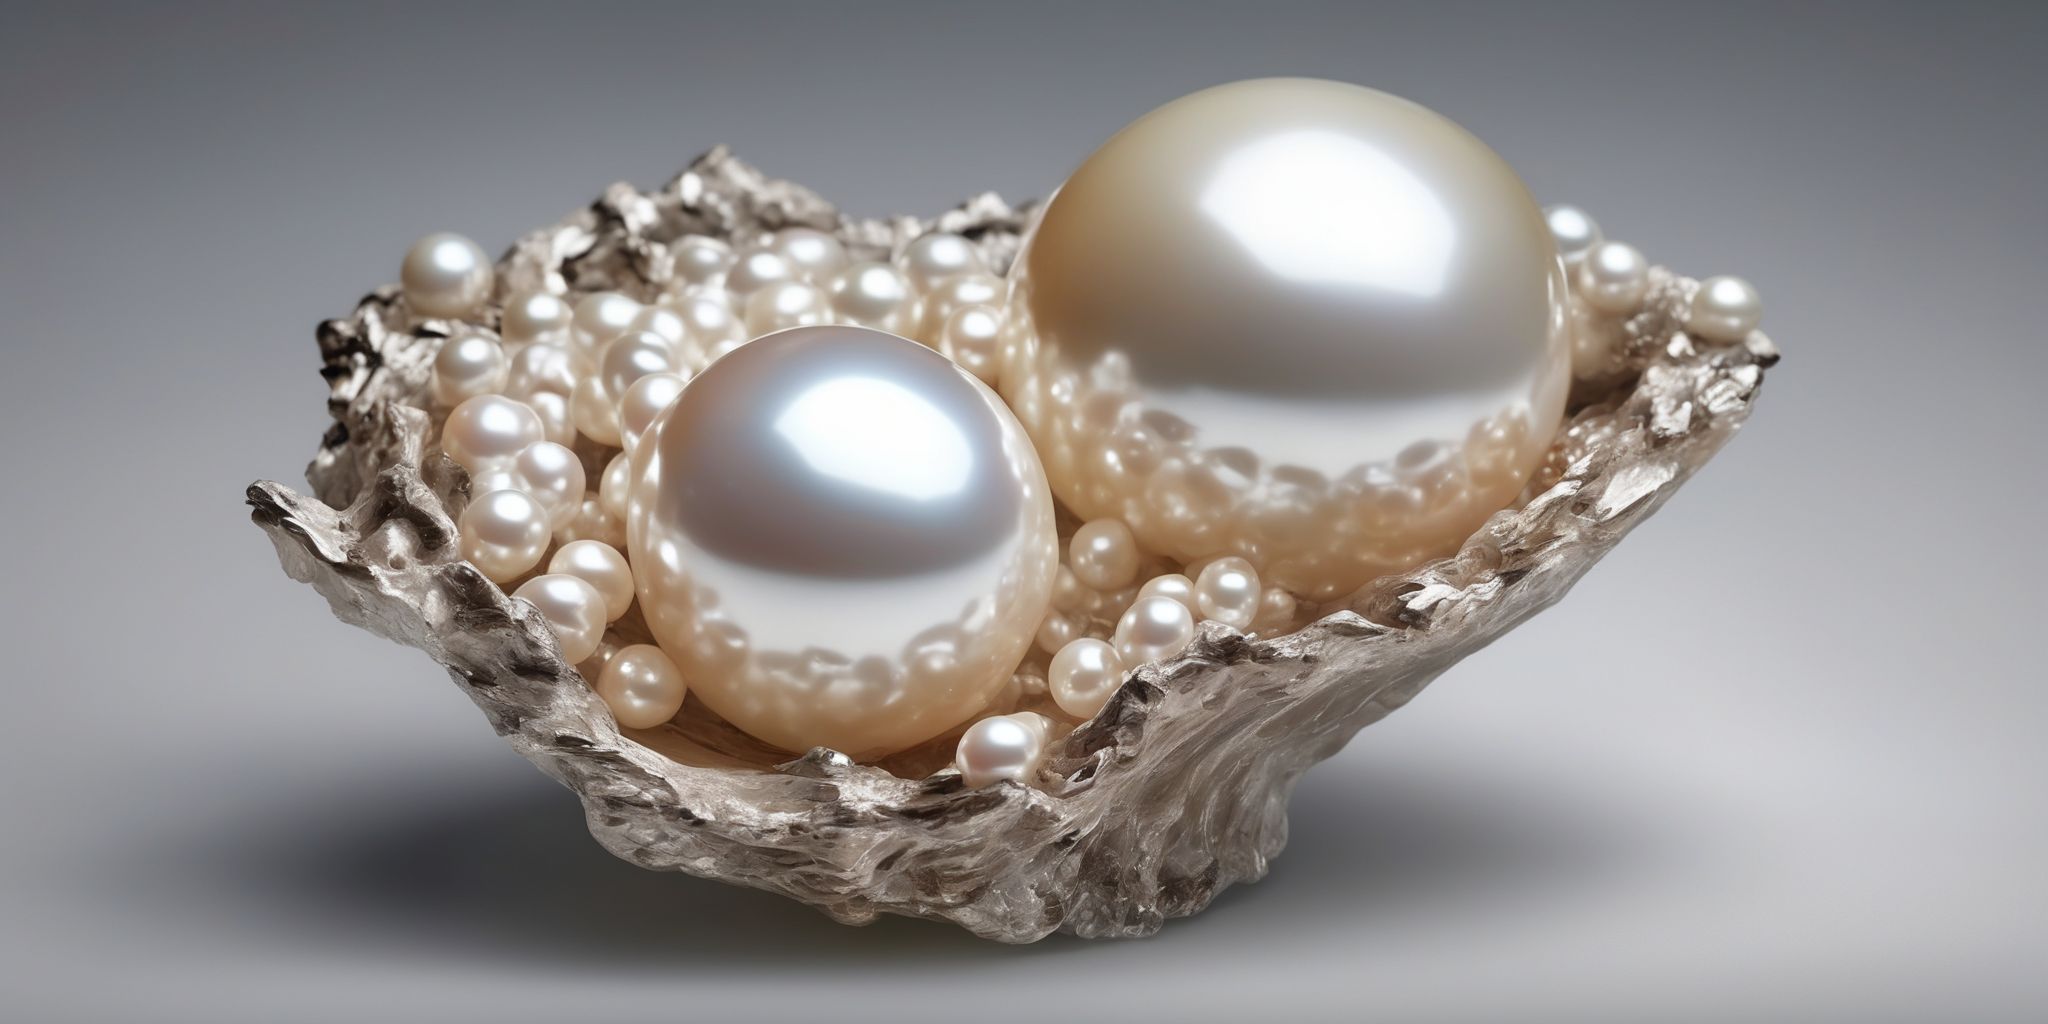 Pearl  in realistic, photographic style